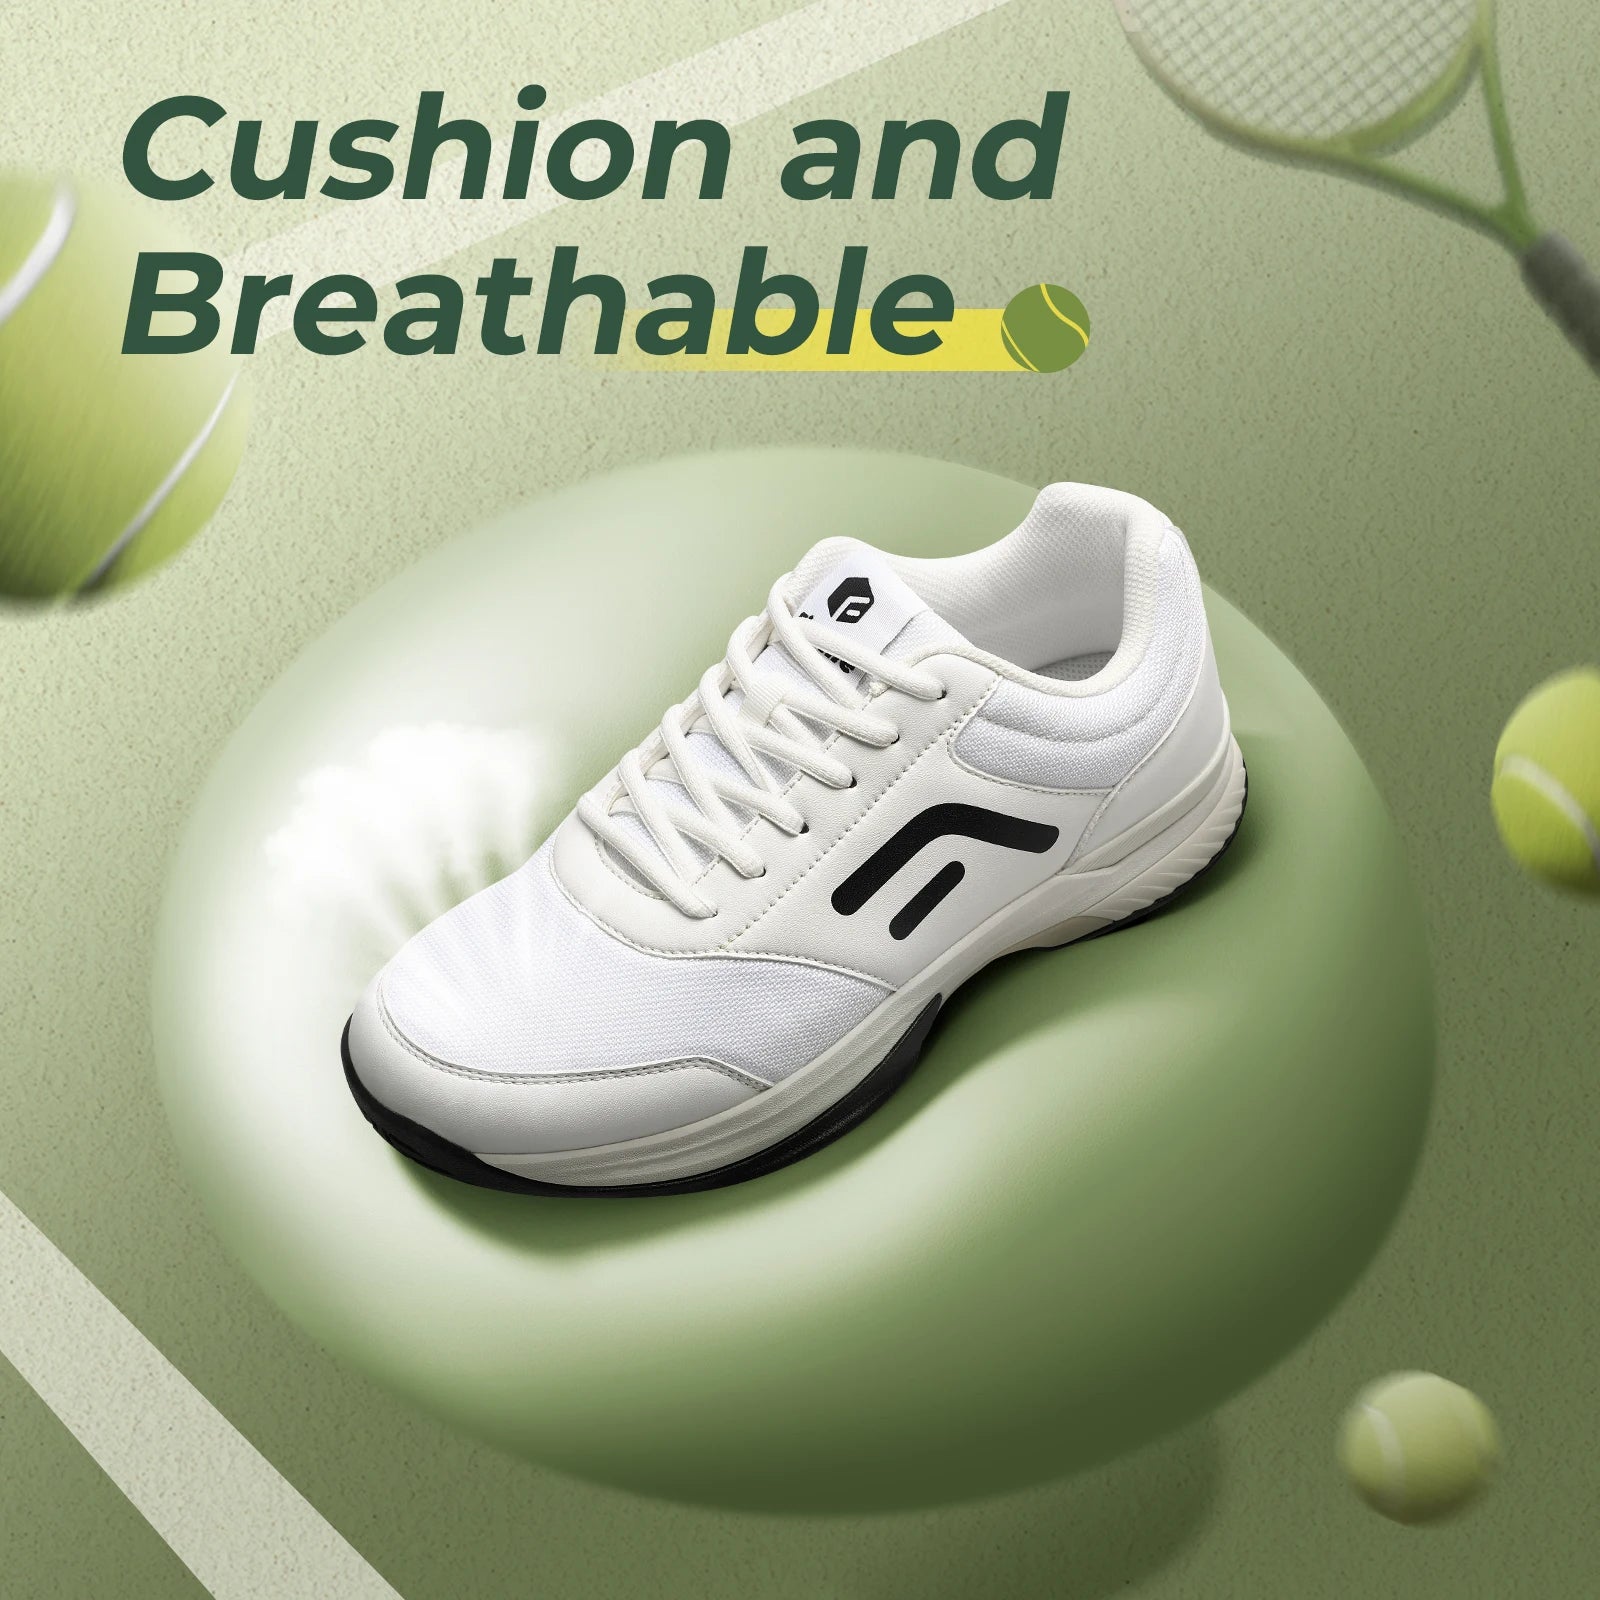 FitVille Wide Men's Tennis Shoes Anti-slip Breathable Professional Sneakers Tennis Footwear for Arch support Relief Pain